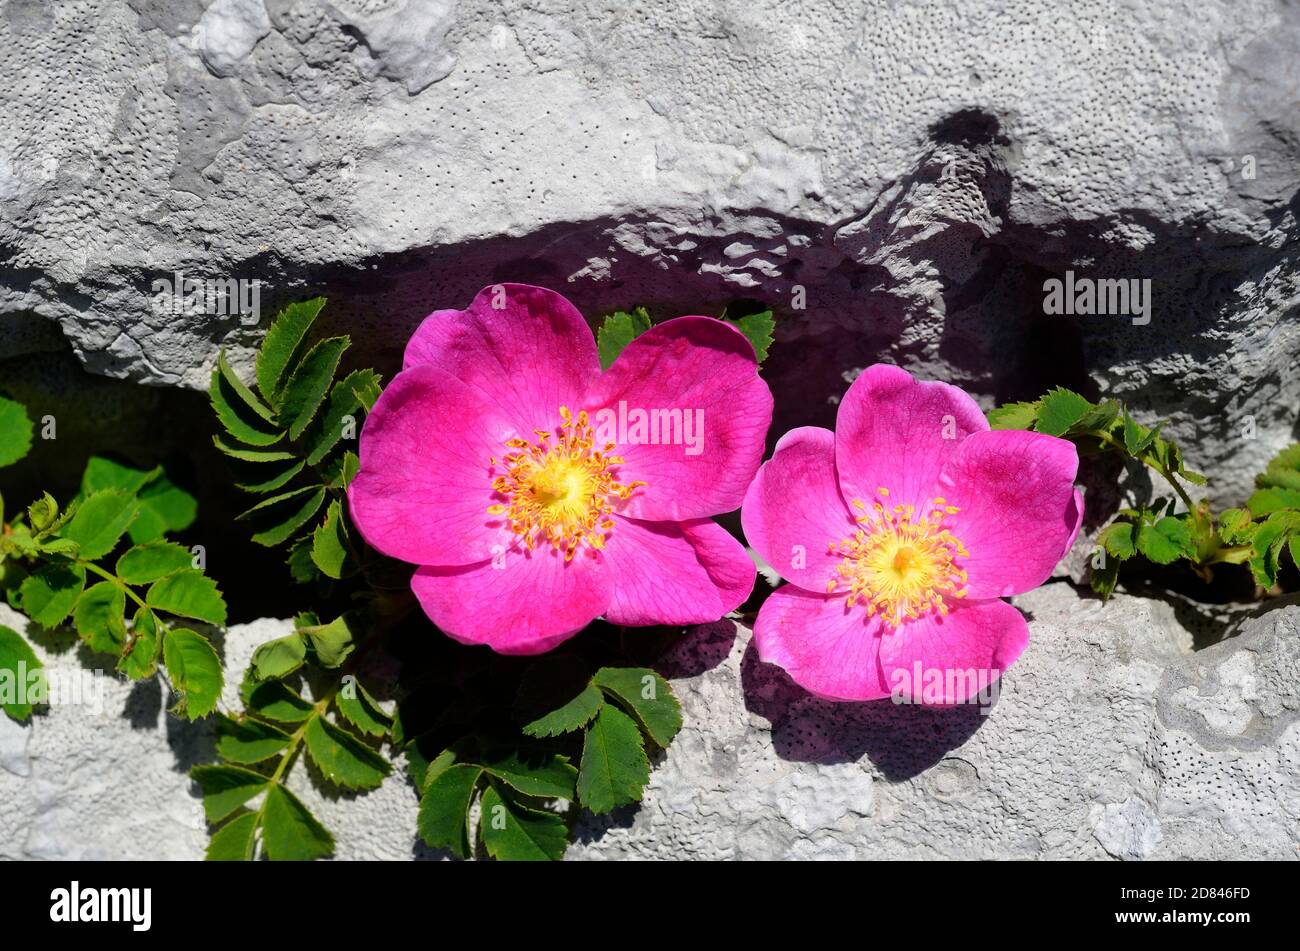 Rosa pendulina is a beautiful rose that grows among the rocks of the mountains Stock Photo